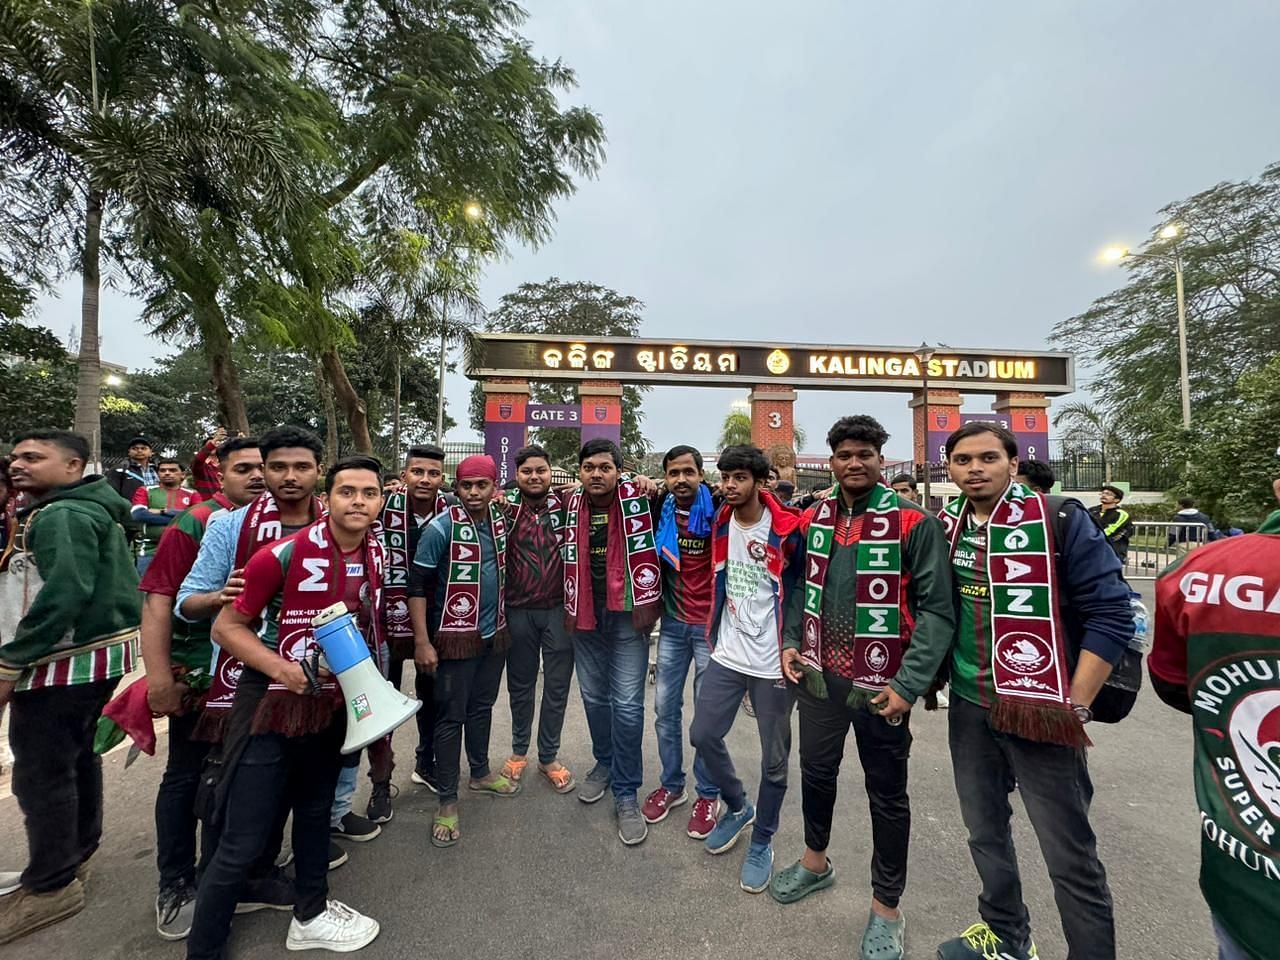 A group of Mohun Bagan supporters ready to cheer their team on.